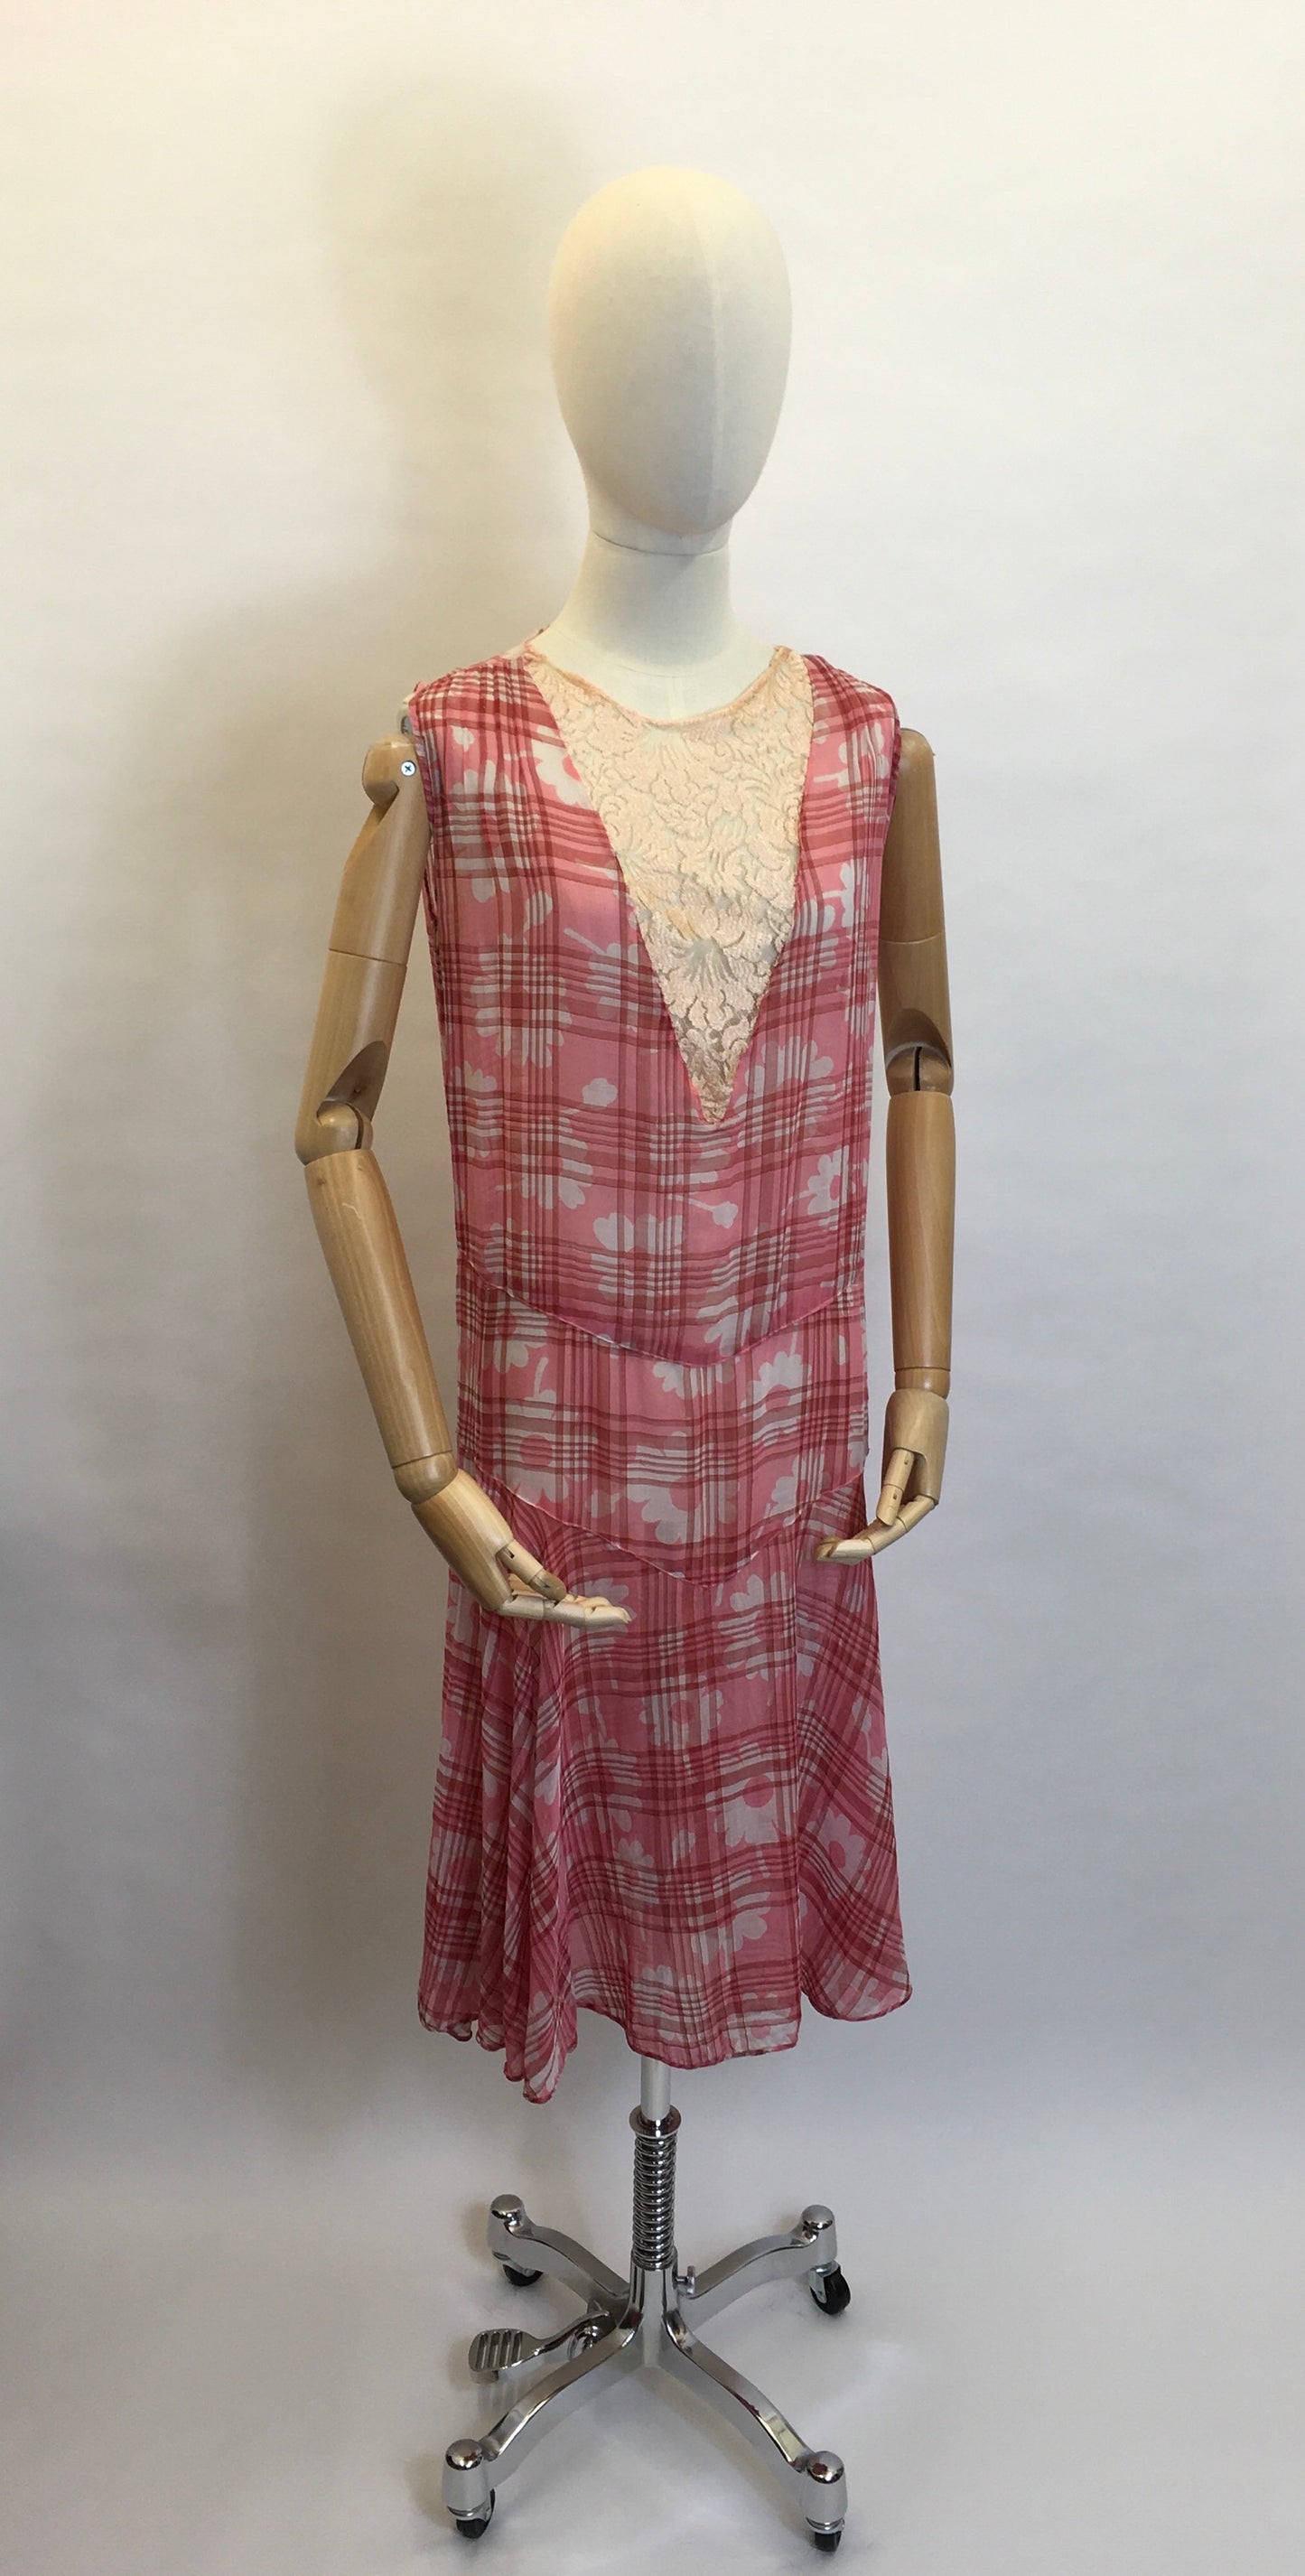 Original 1920s Day Dress - A Stunning Blend of Lace & Cotton Lawn